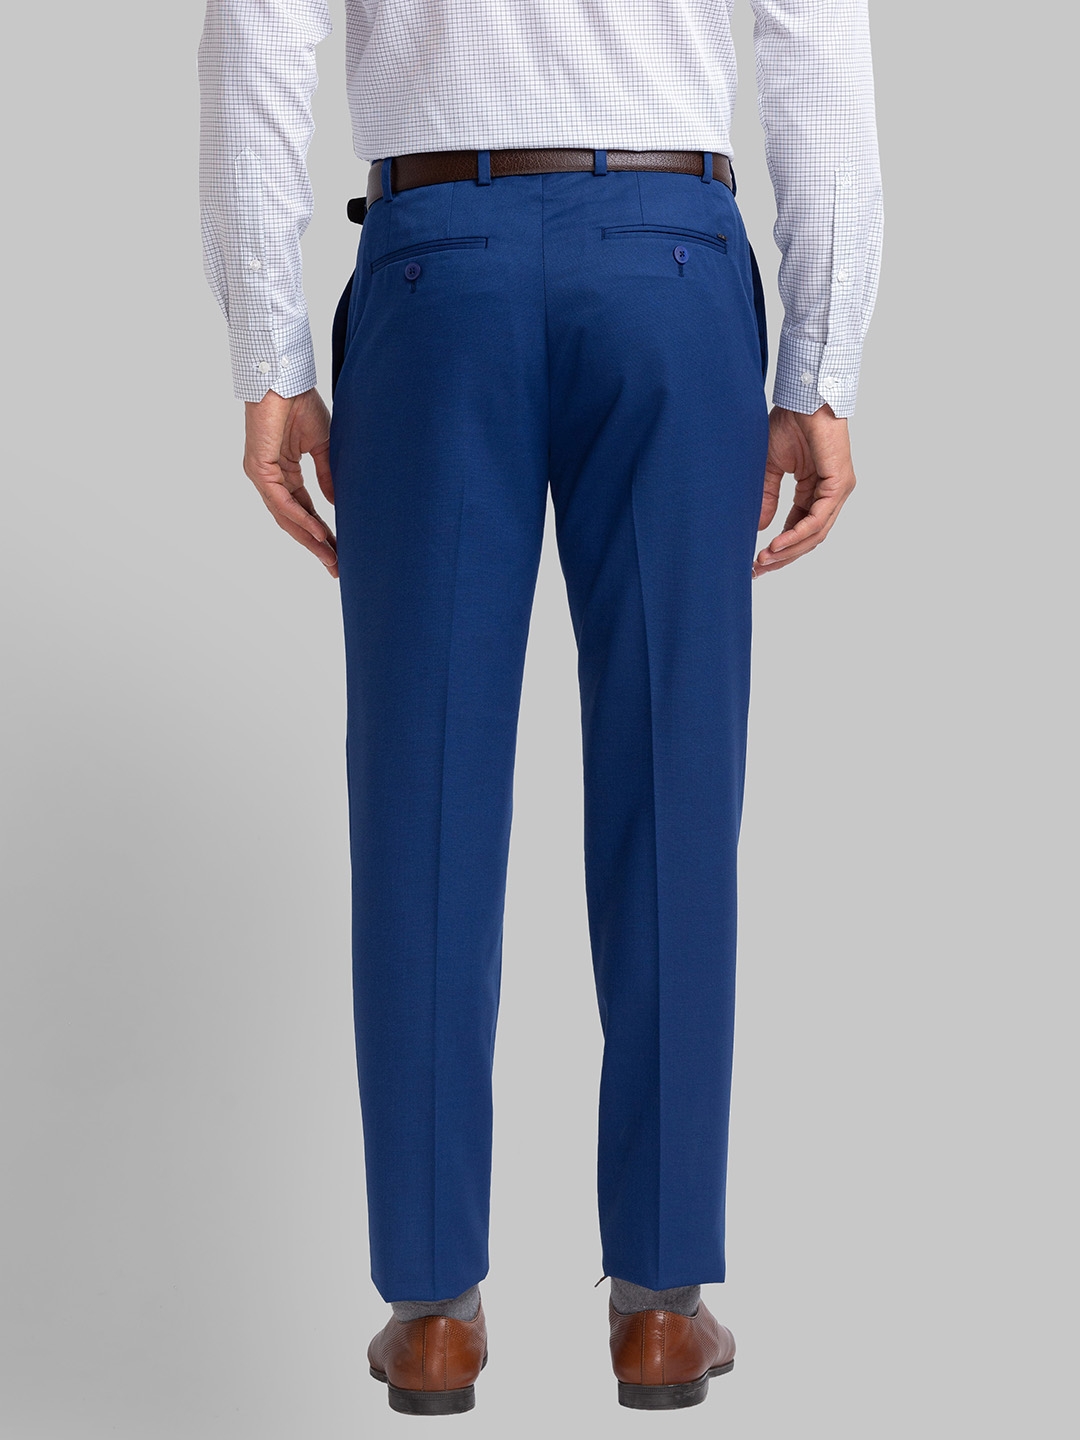 Blue Blue Slim Fit Pants by Raymond for rent online | FLYROBE